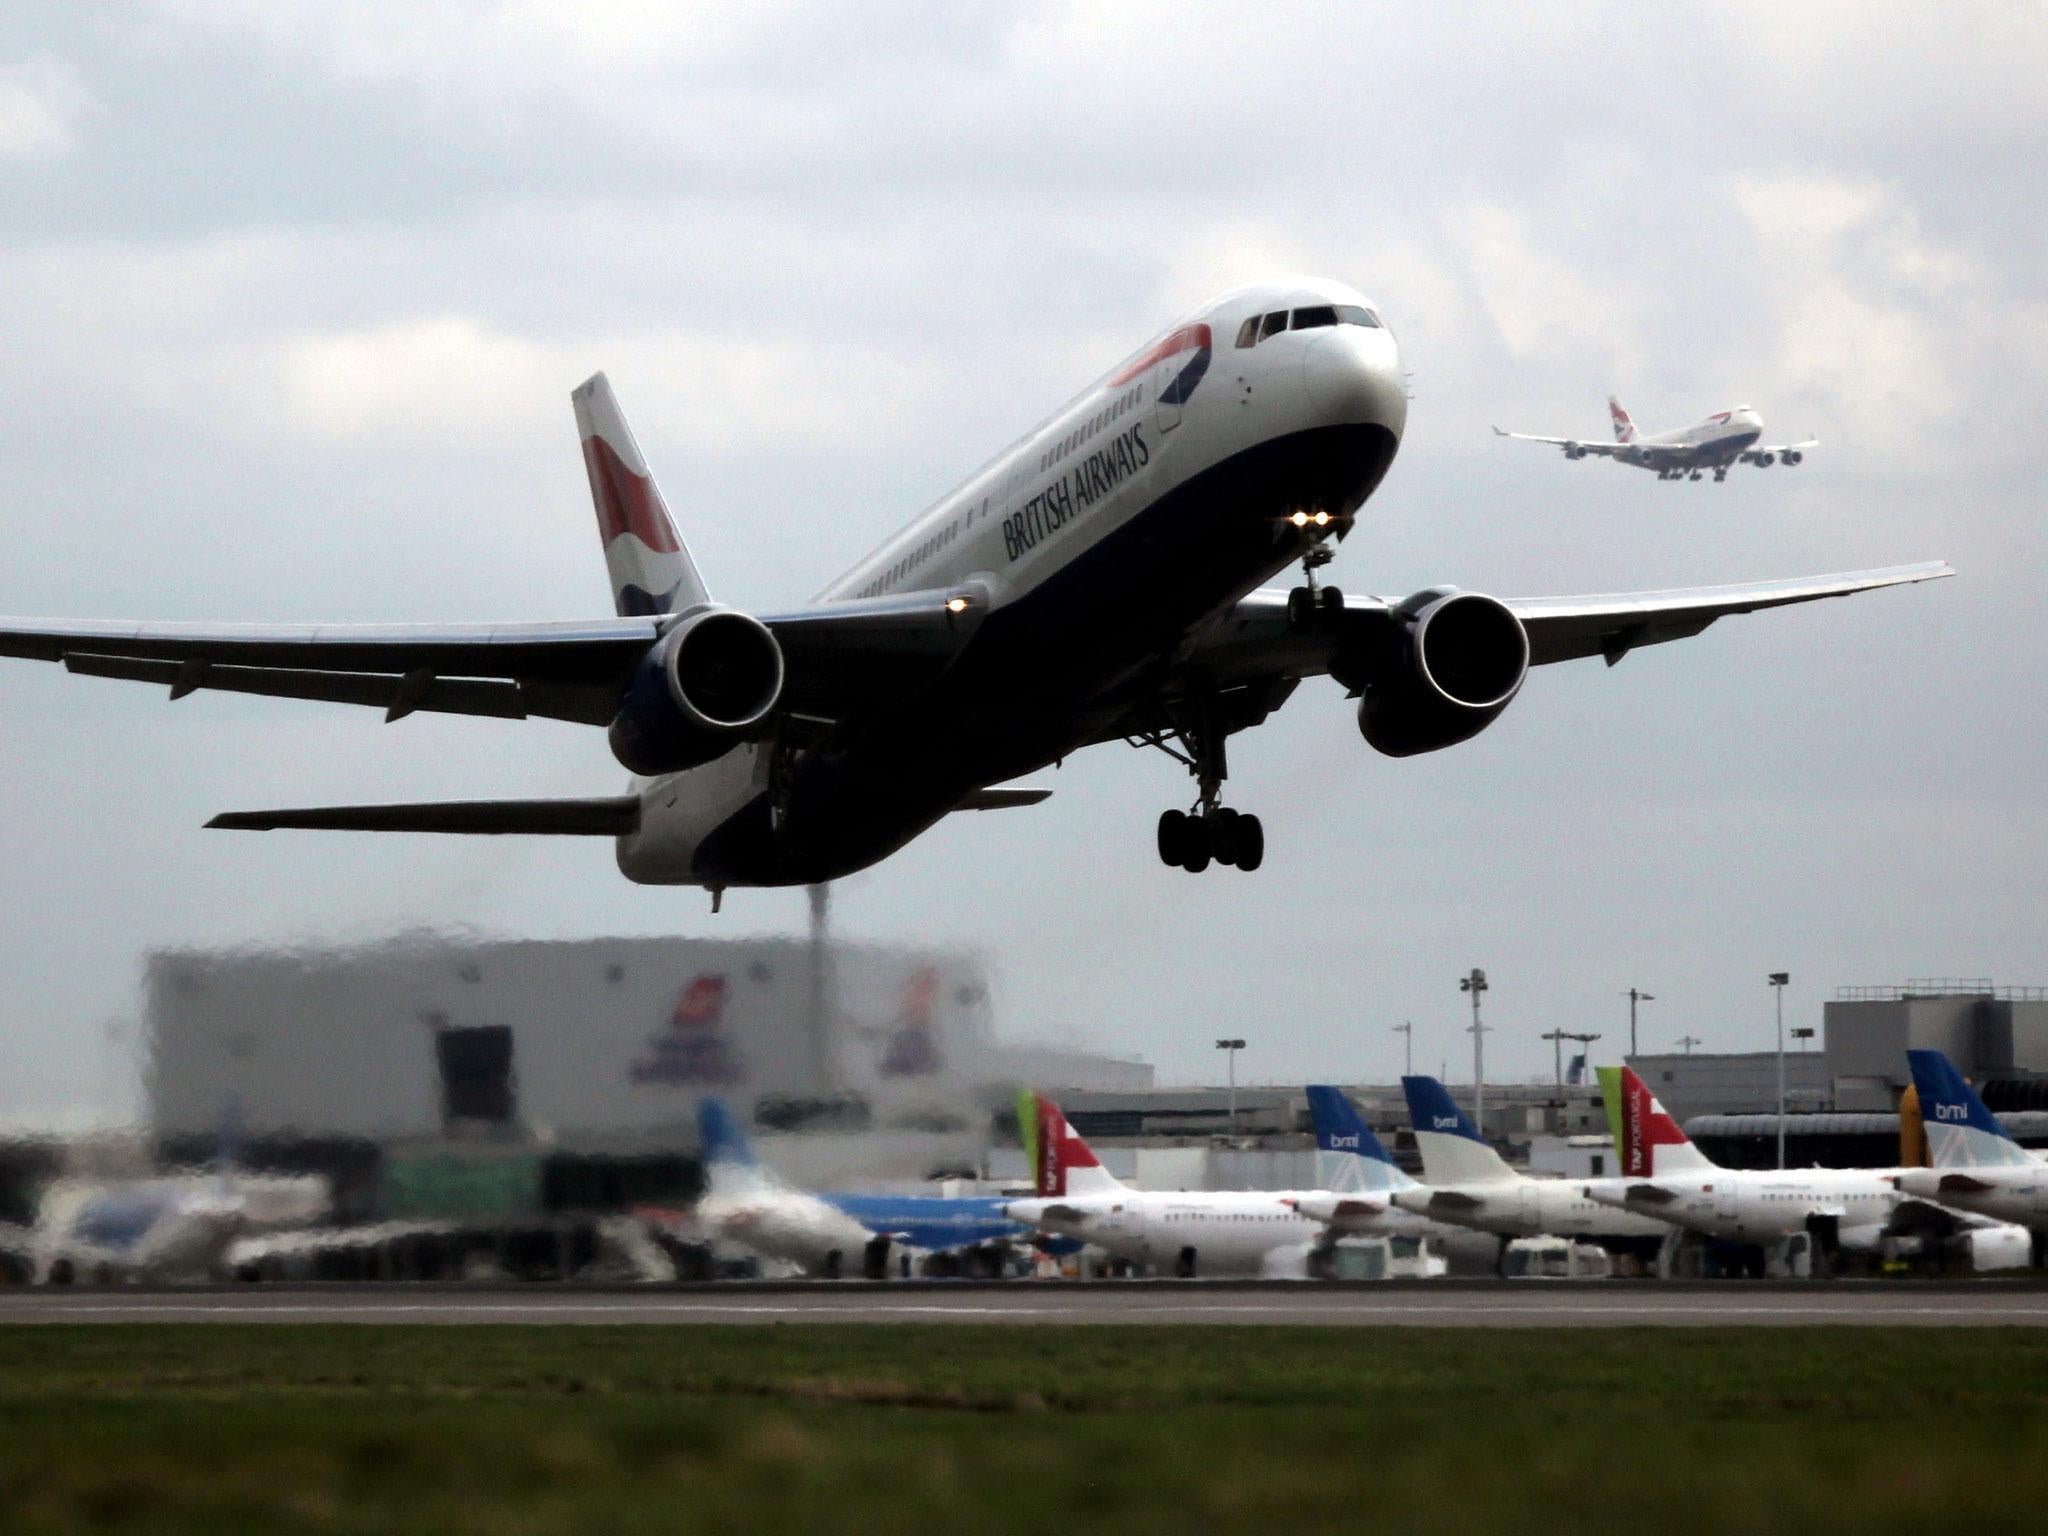 The pilot turned back as a precaution and the flight was met by fire crews when it landed at Gatwick